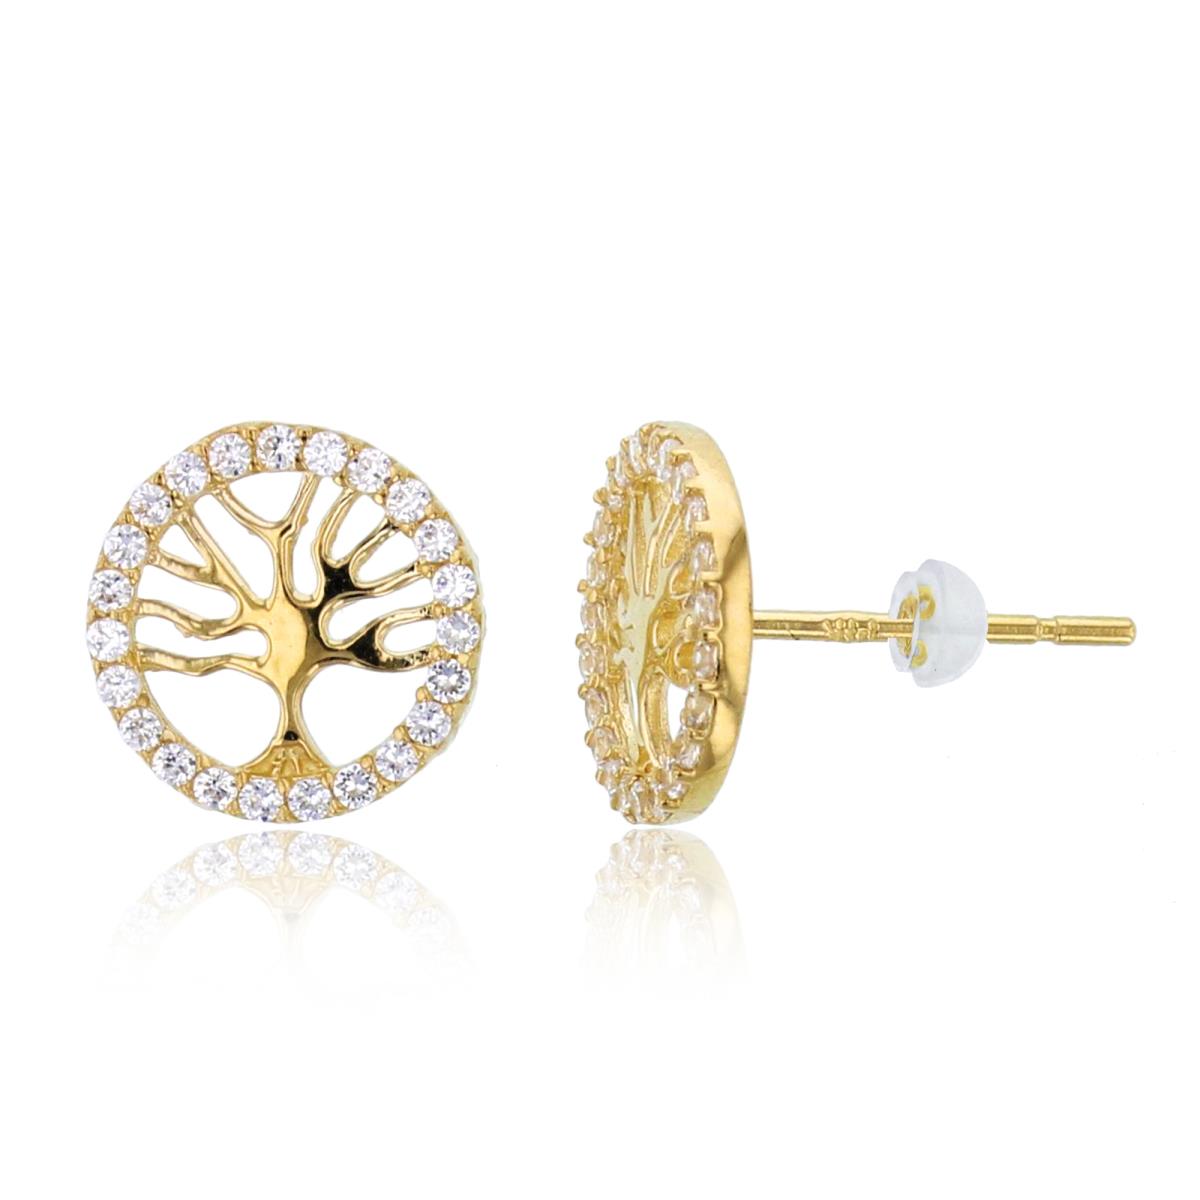 10K Yellow Gold Rnd CZ "Tree of Life" Circle Studs with Silicon Backs